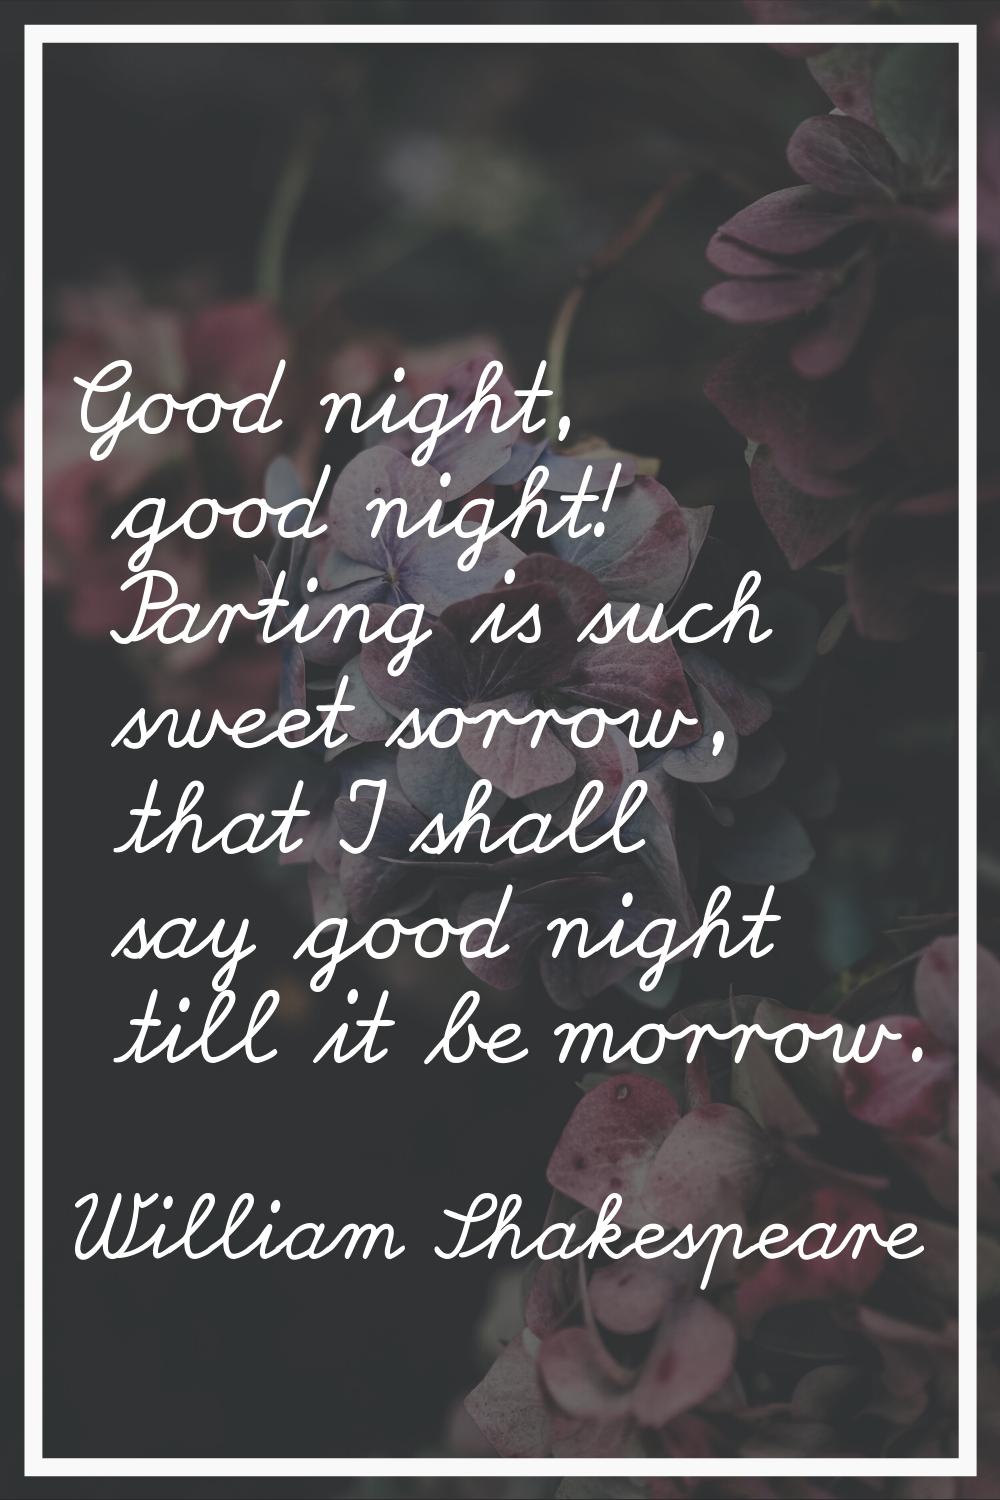 Good night, good night! Parting is such sweet sorrow, that I shall say good night till it be morrow